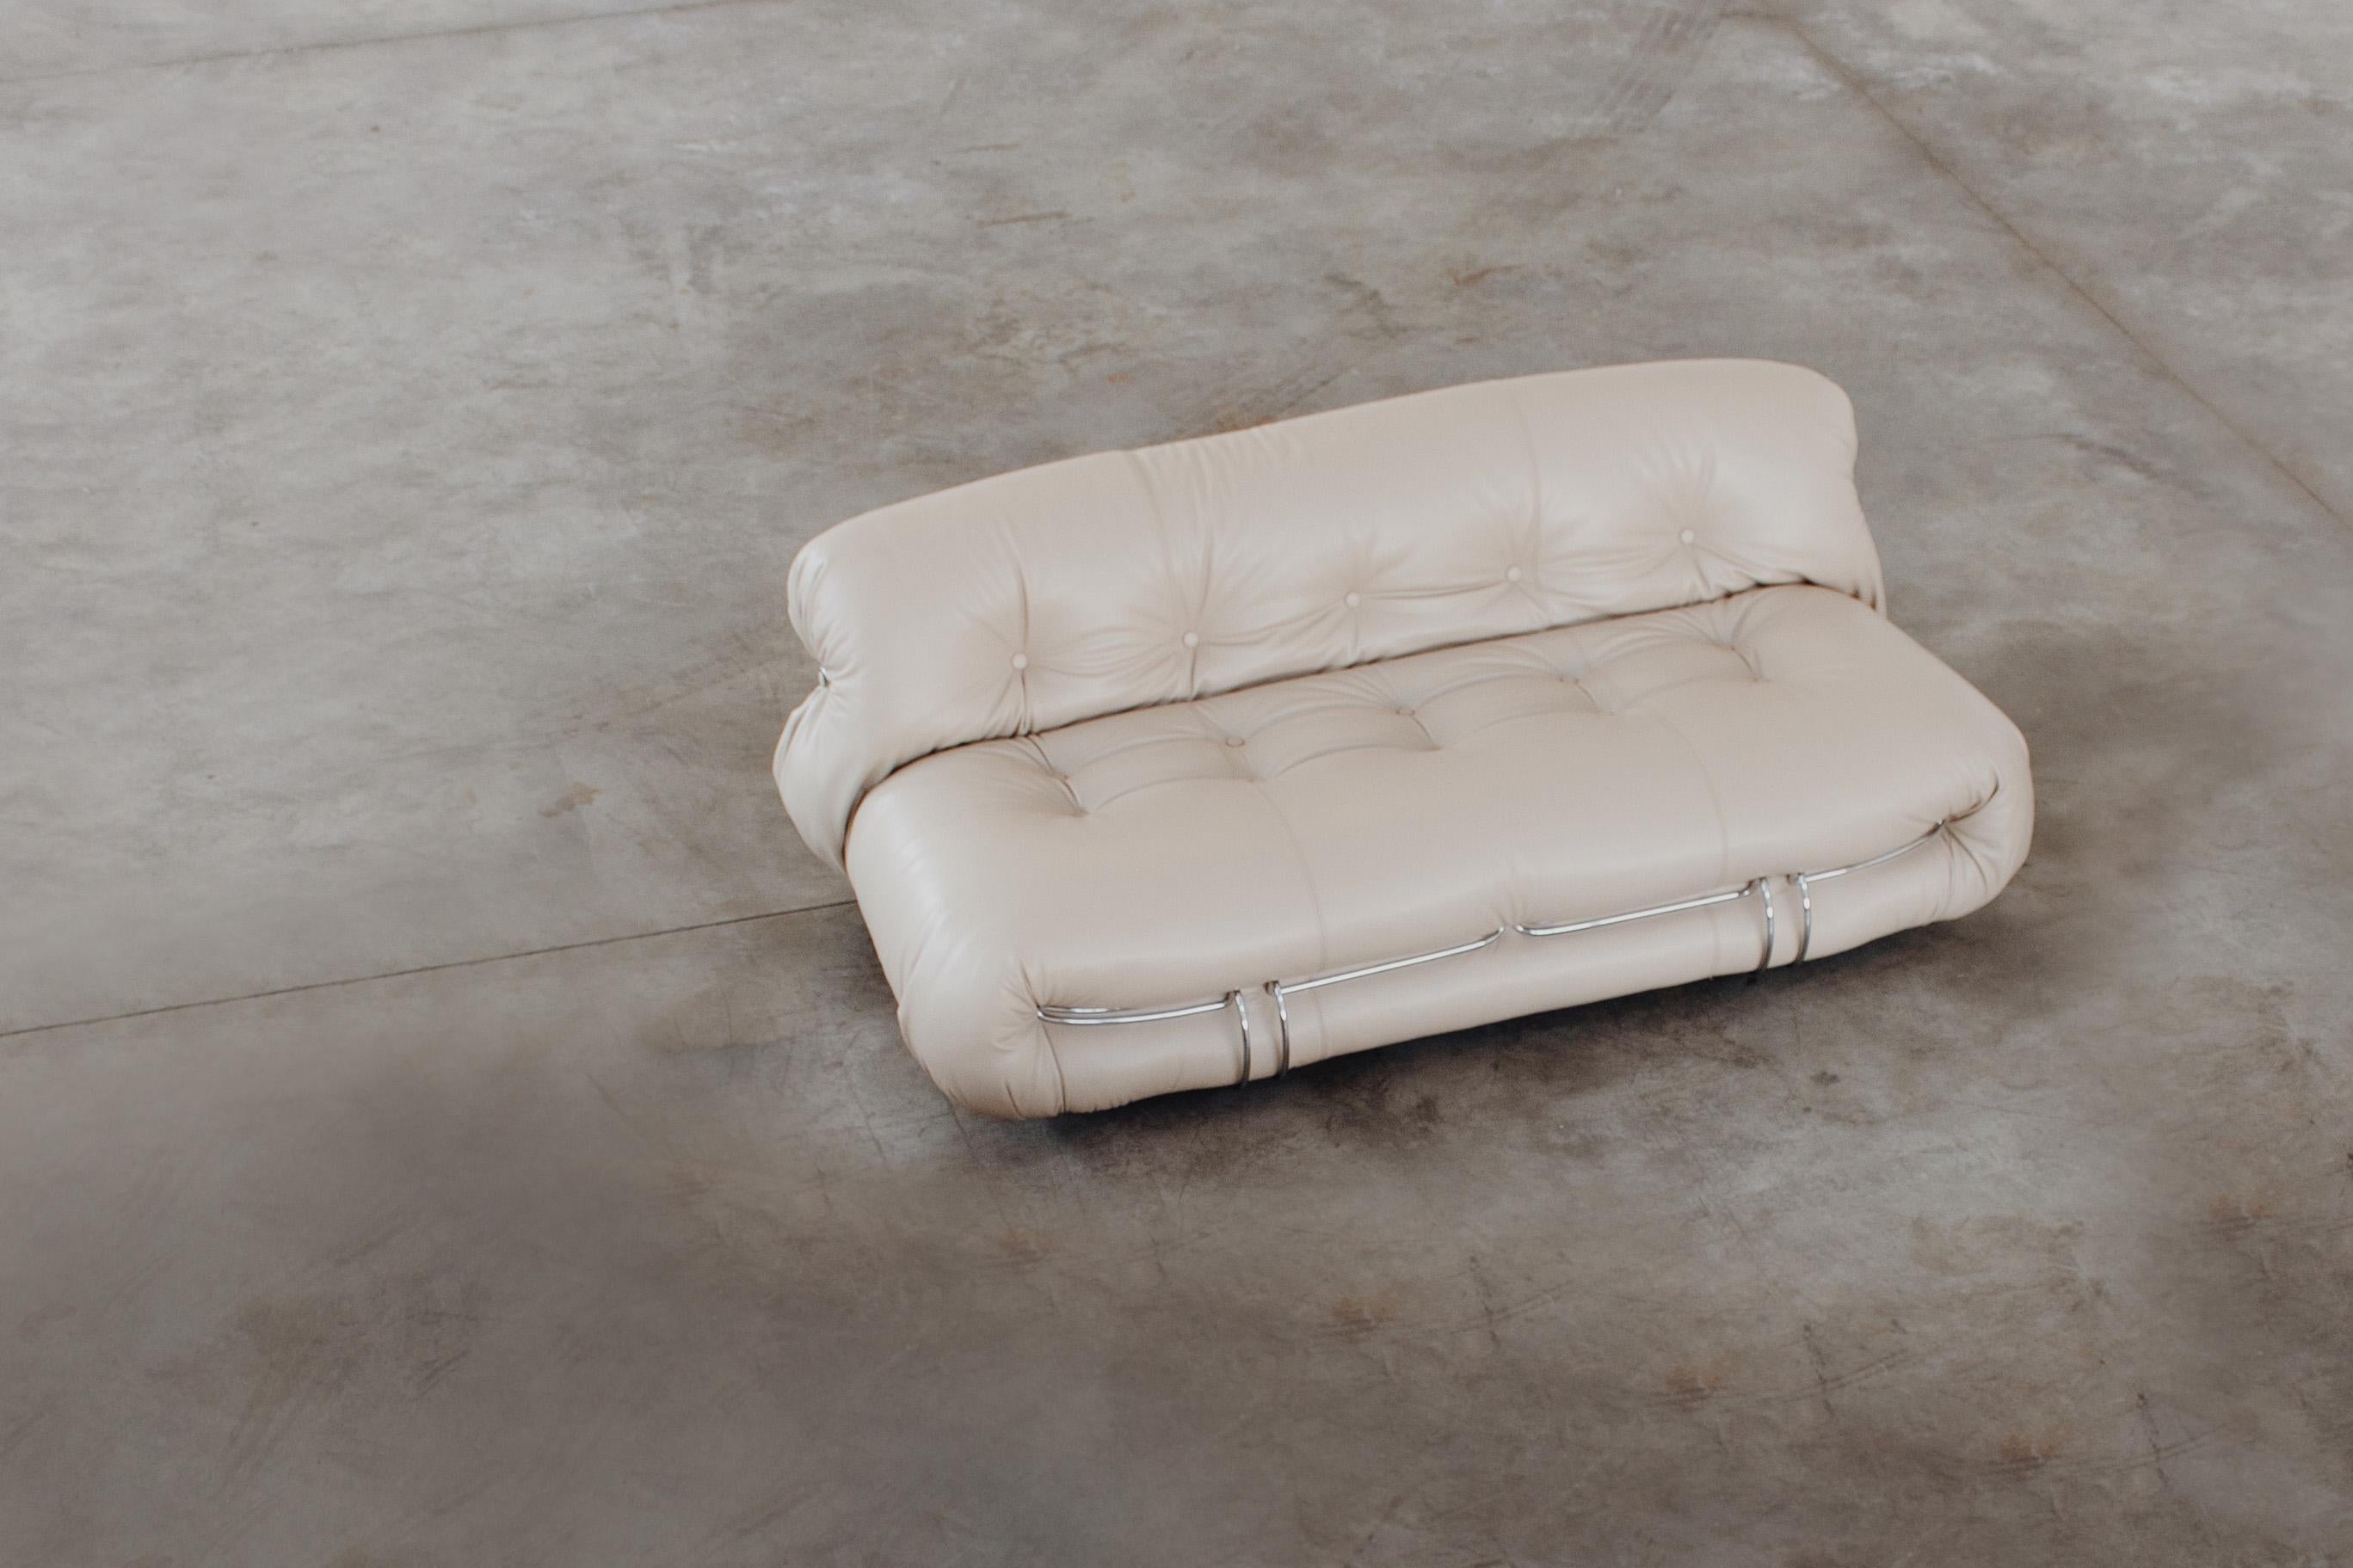 Mid-Century Modern Afra & Tobia Scarpa “Soriana” Sofa for Cassina, Champagne Leather, 1969 For Sale